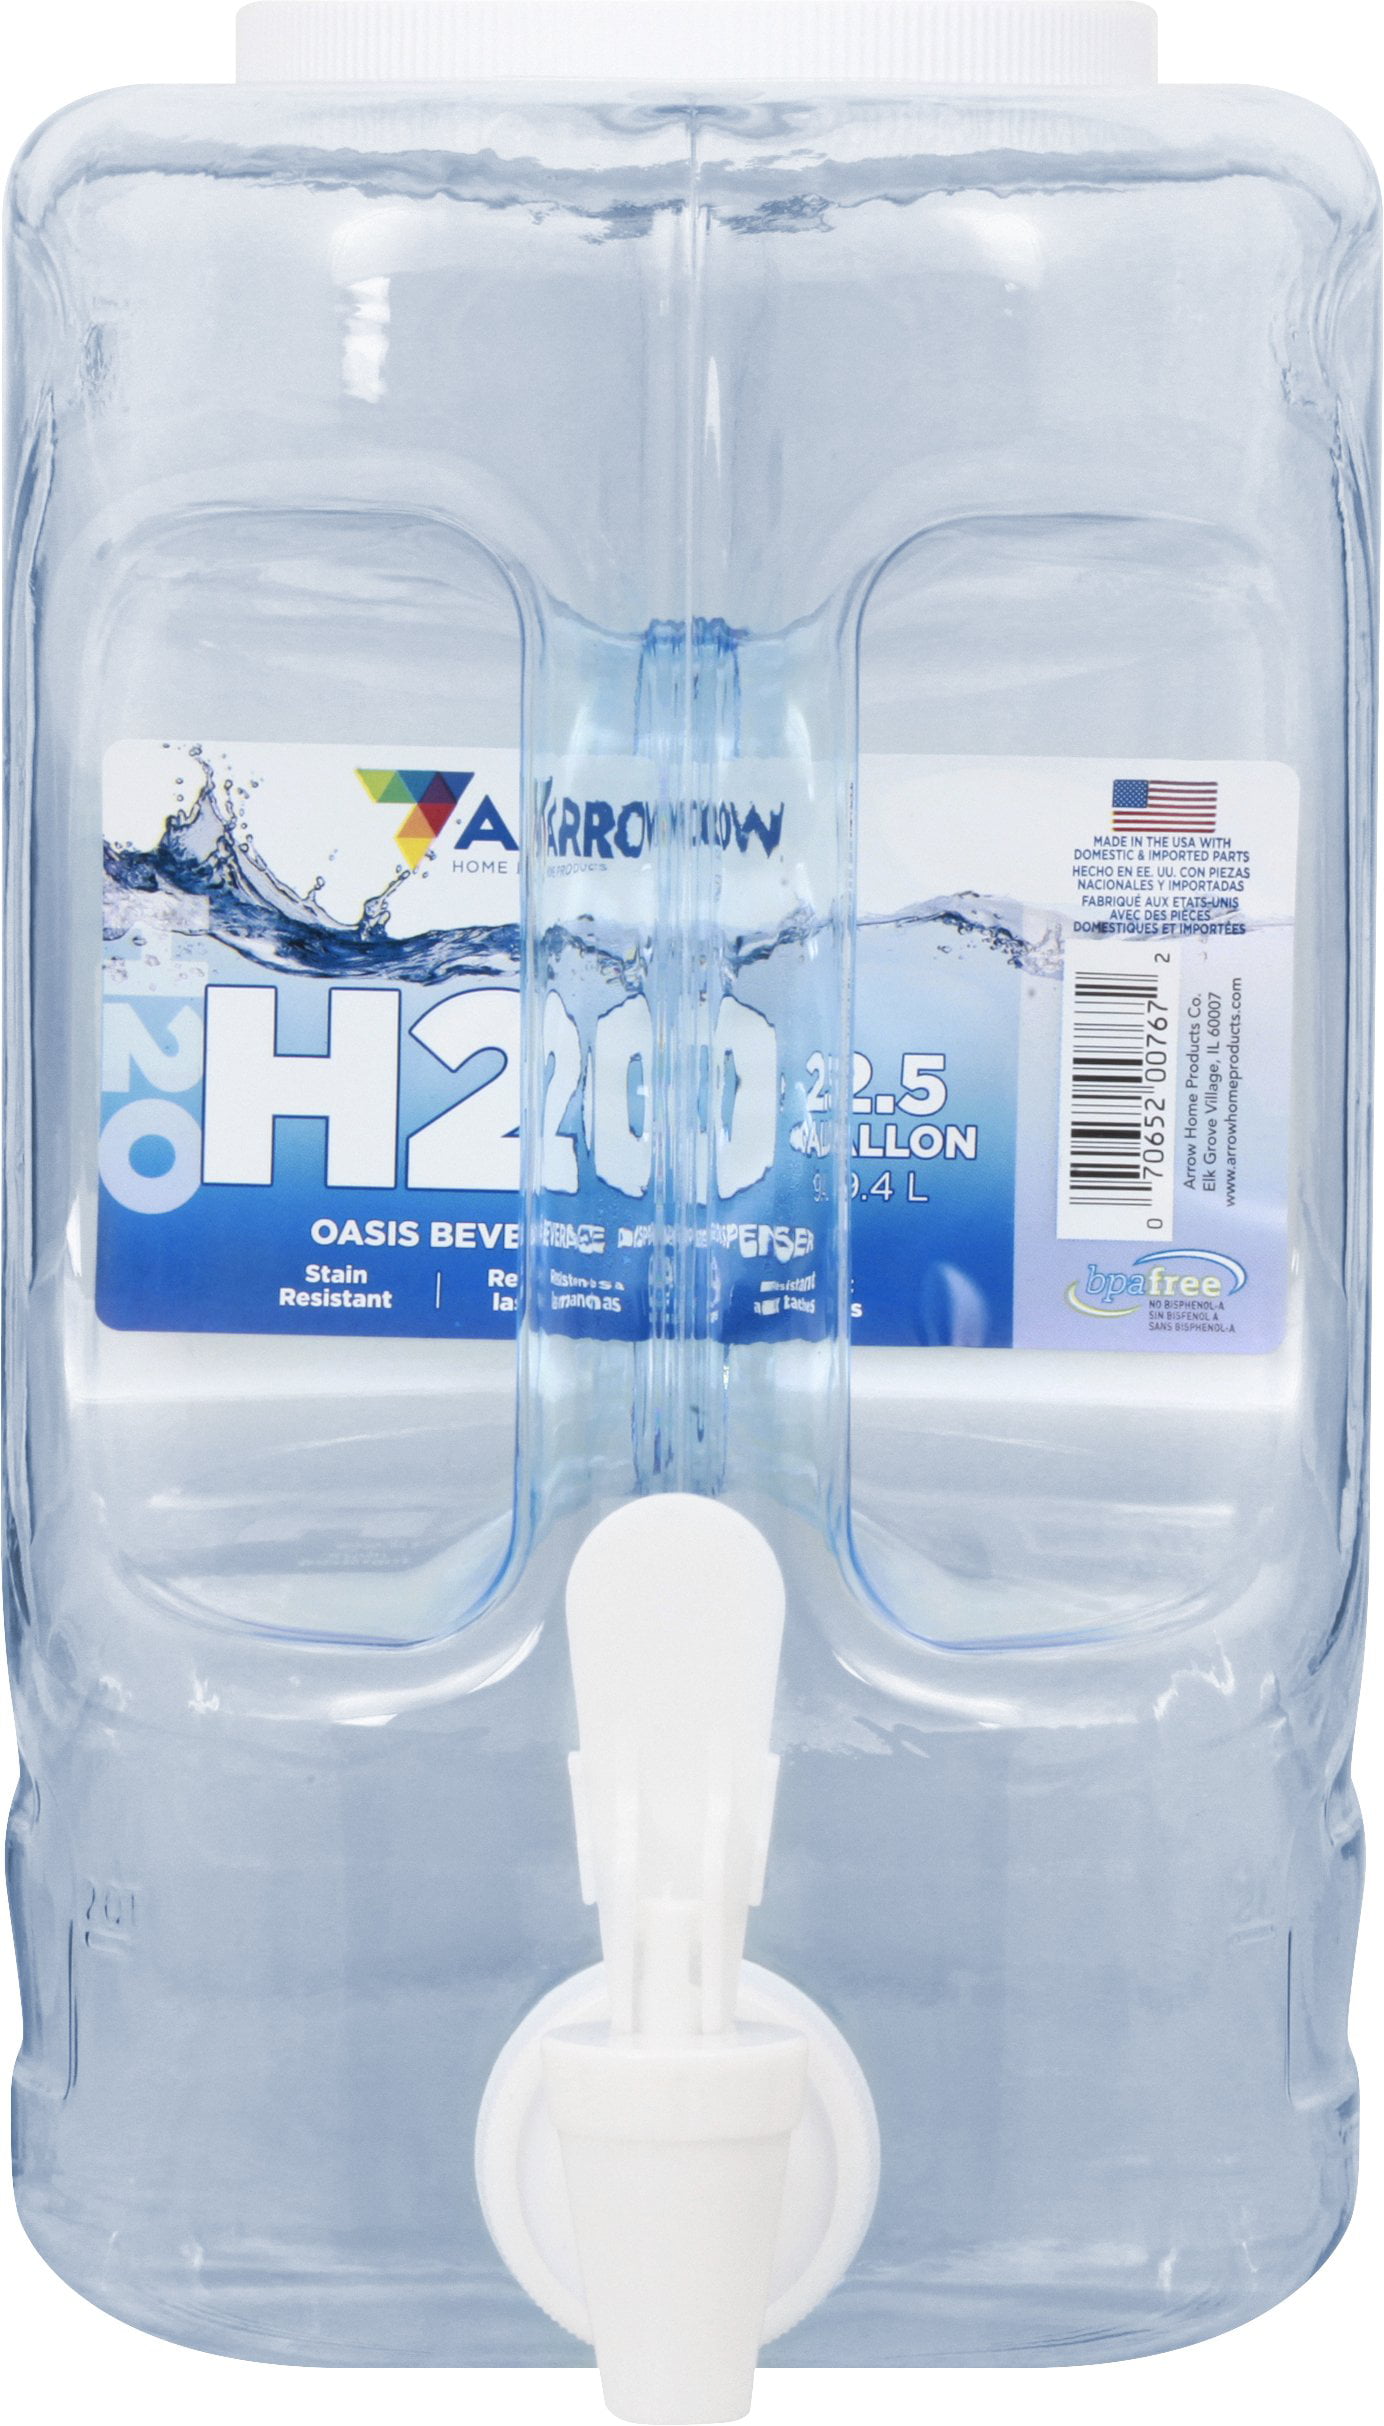 Arrow Home Products H2O Ultra 2 Gallon Water Dispenser 00763 – Good's Store  Online